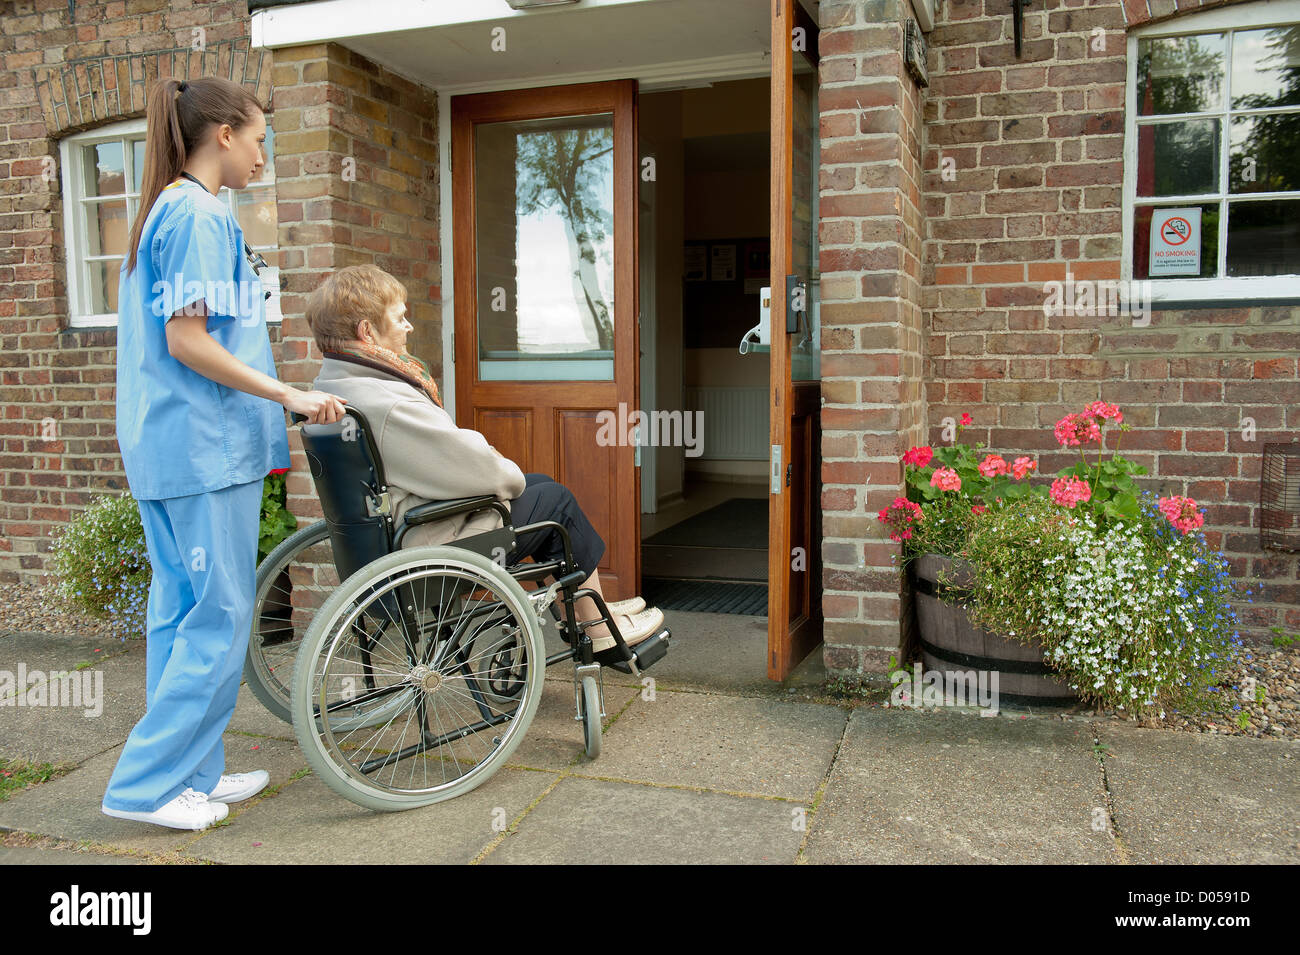 Nurse/doctors pushing elderly female patient in a wheelchair towards entrance of hospital or care home. Stock Photo